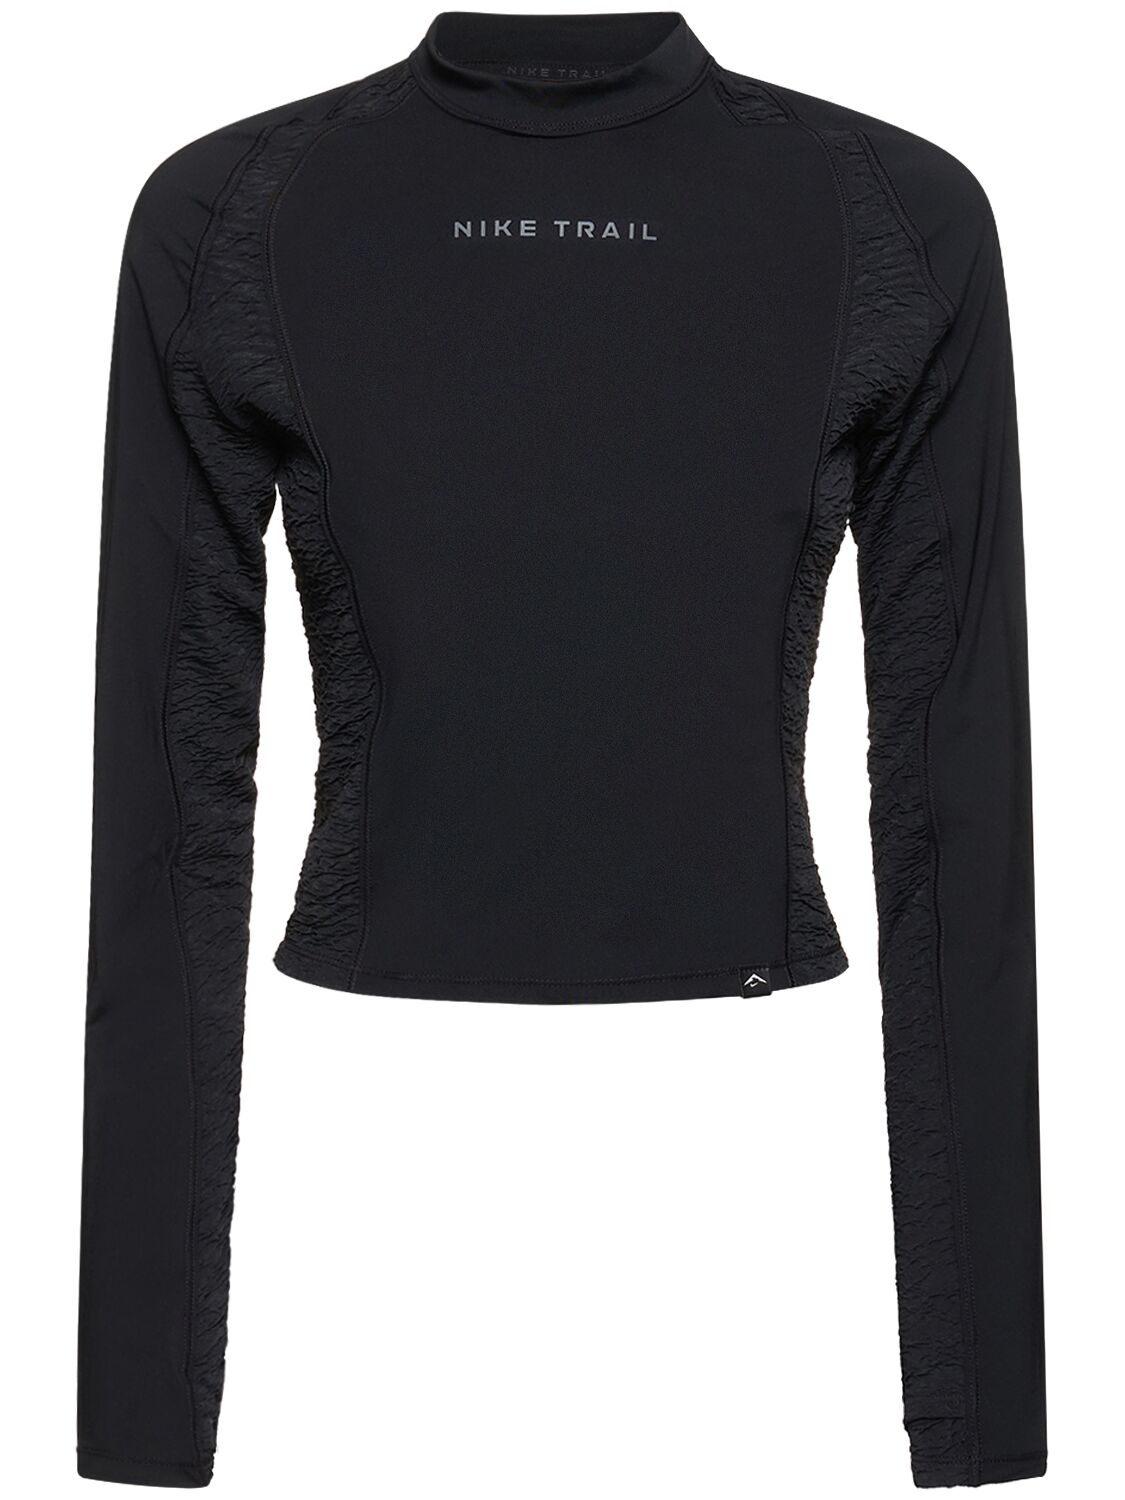 Image of Dri-fit Long Sleeve Running Top